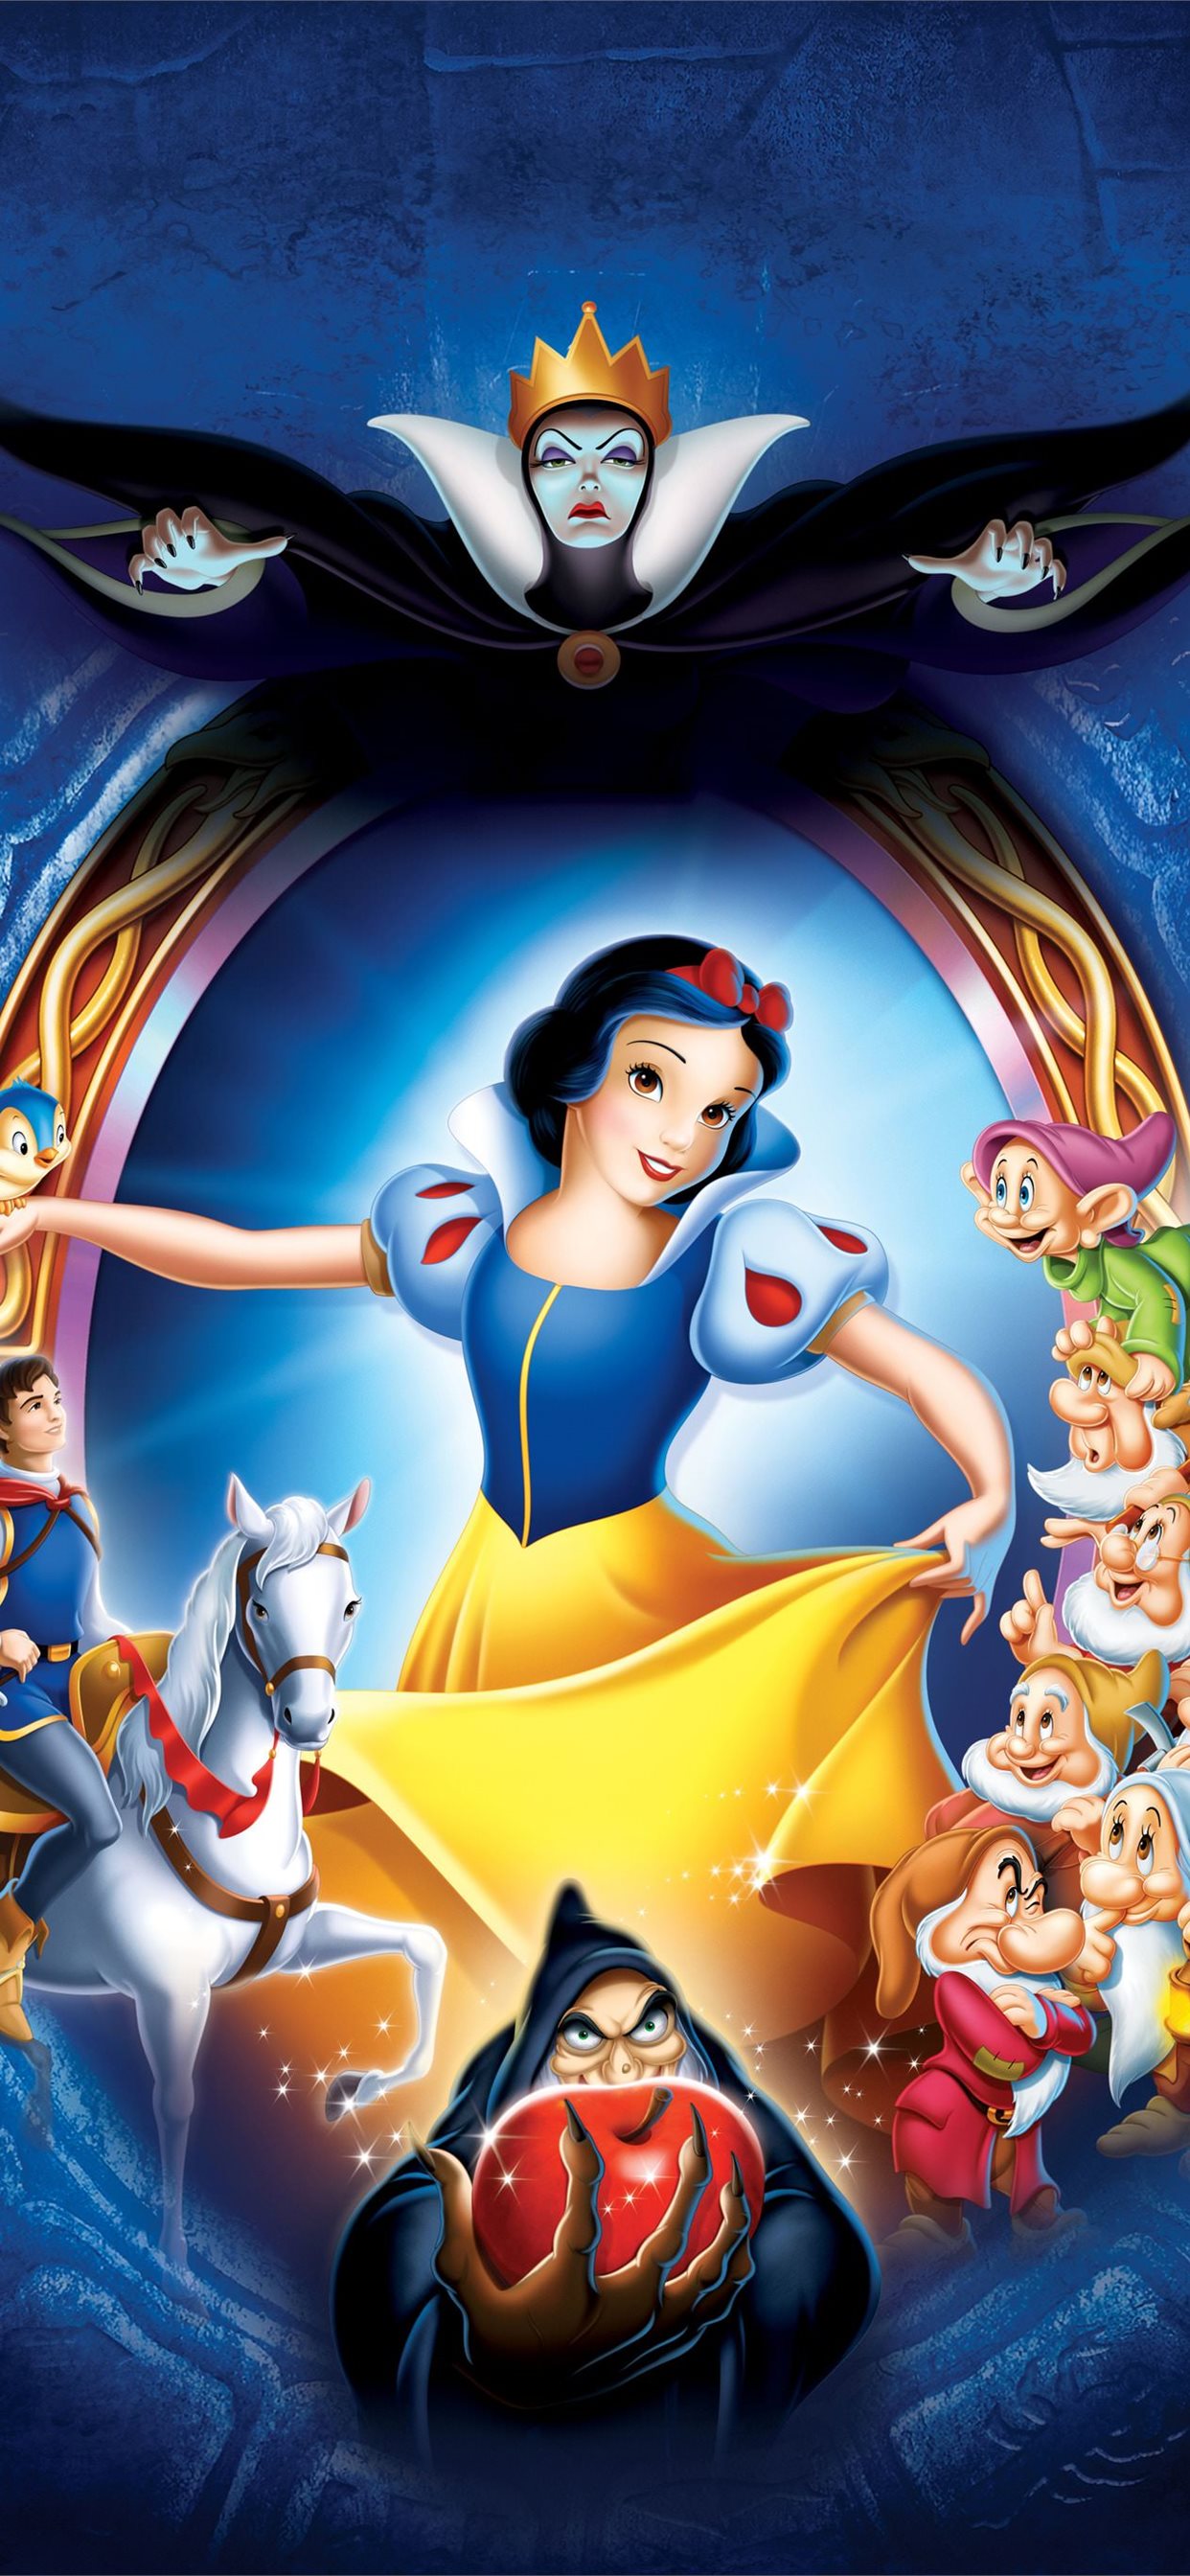 Snow White And The Seven Dwarfs And Prince Photo Gallery Hd Wallpaper For  Desktop 1920x1200 : Wallpapers13.com